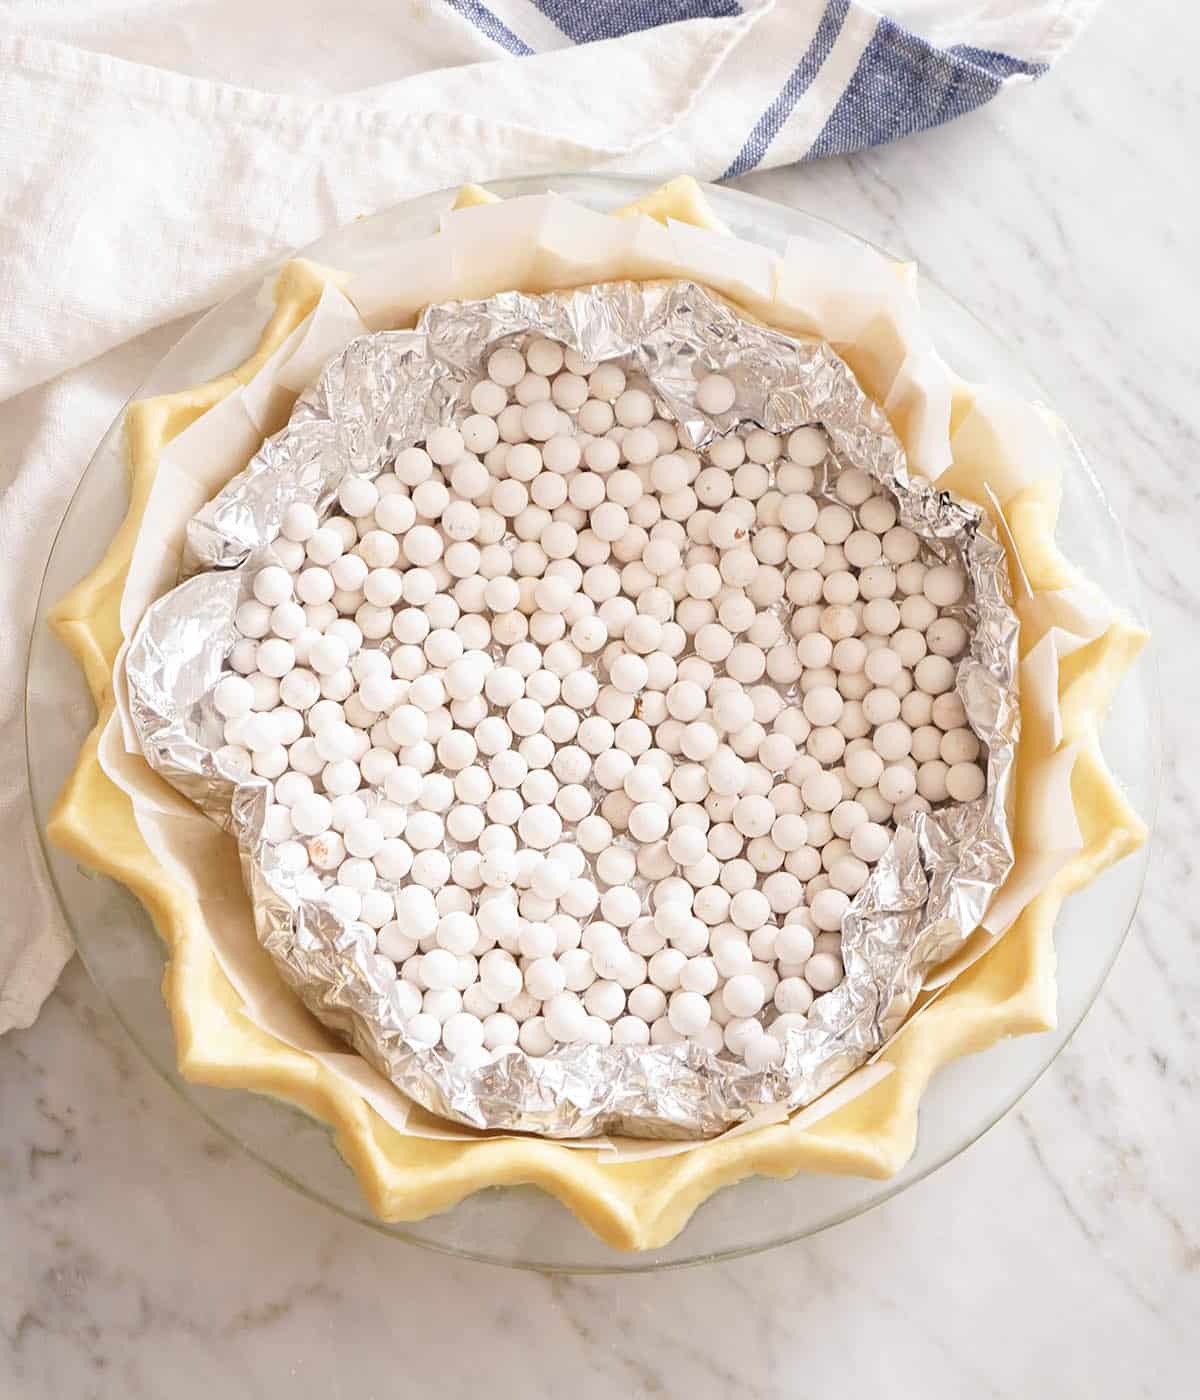 An unbaked pie crust filled with foil and baking weights.